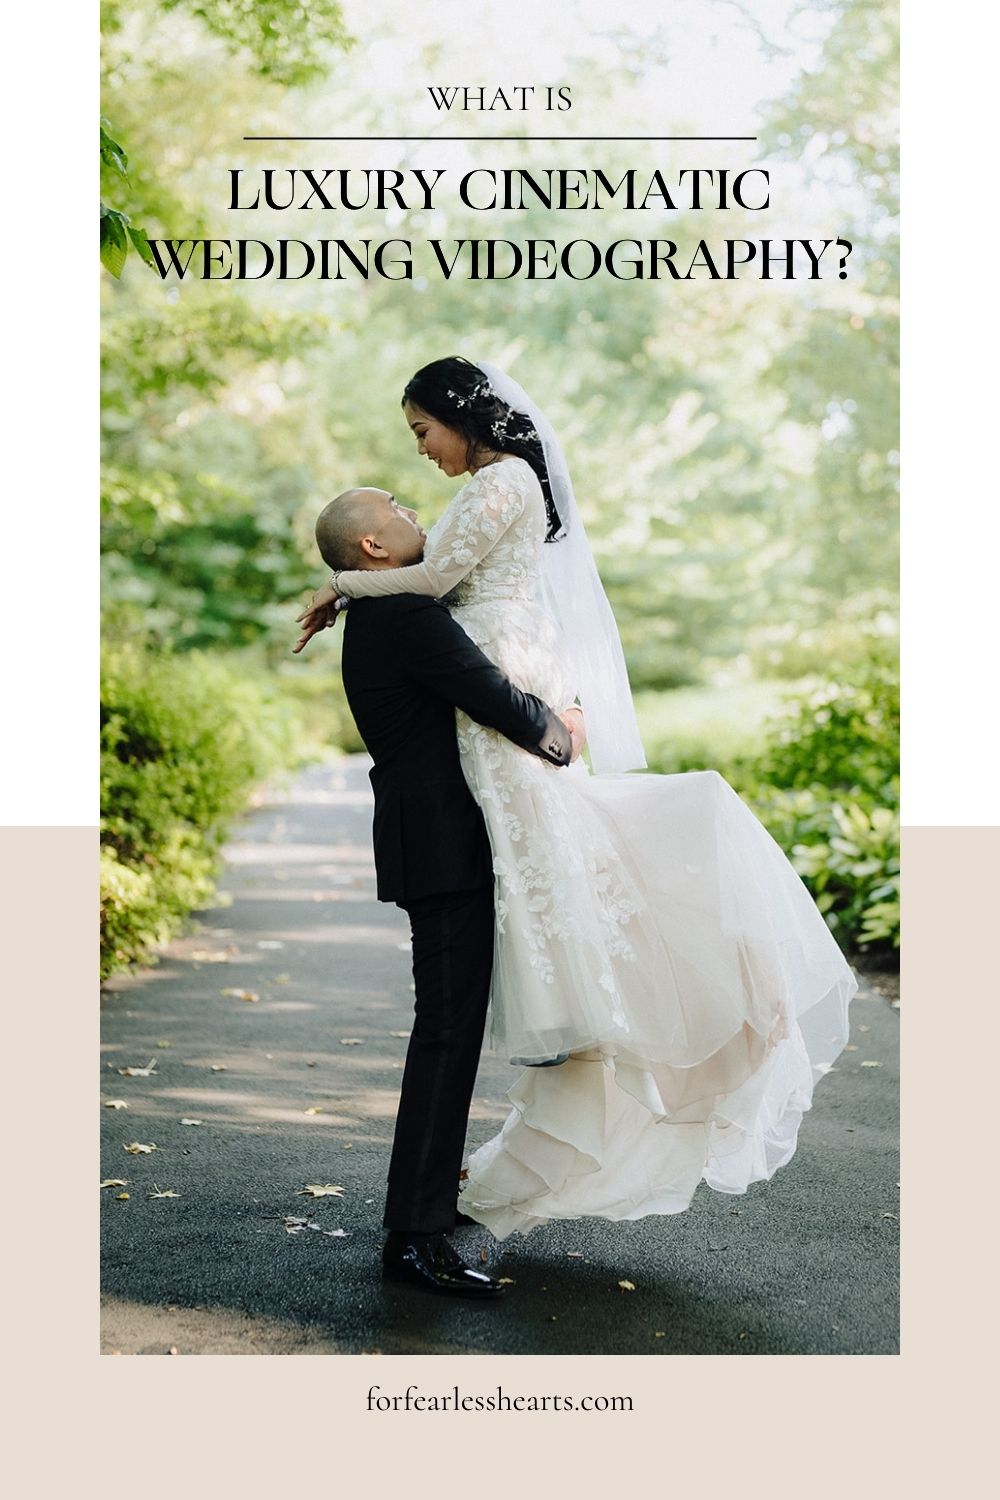 Groom lifts bride up during their wedding shoot; image overlaid with text that reads What is Luxury Cinematic Wedding Videography?